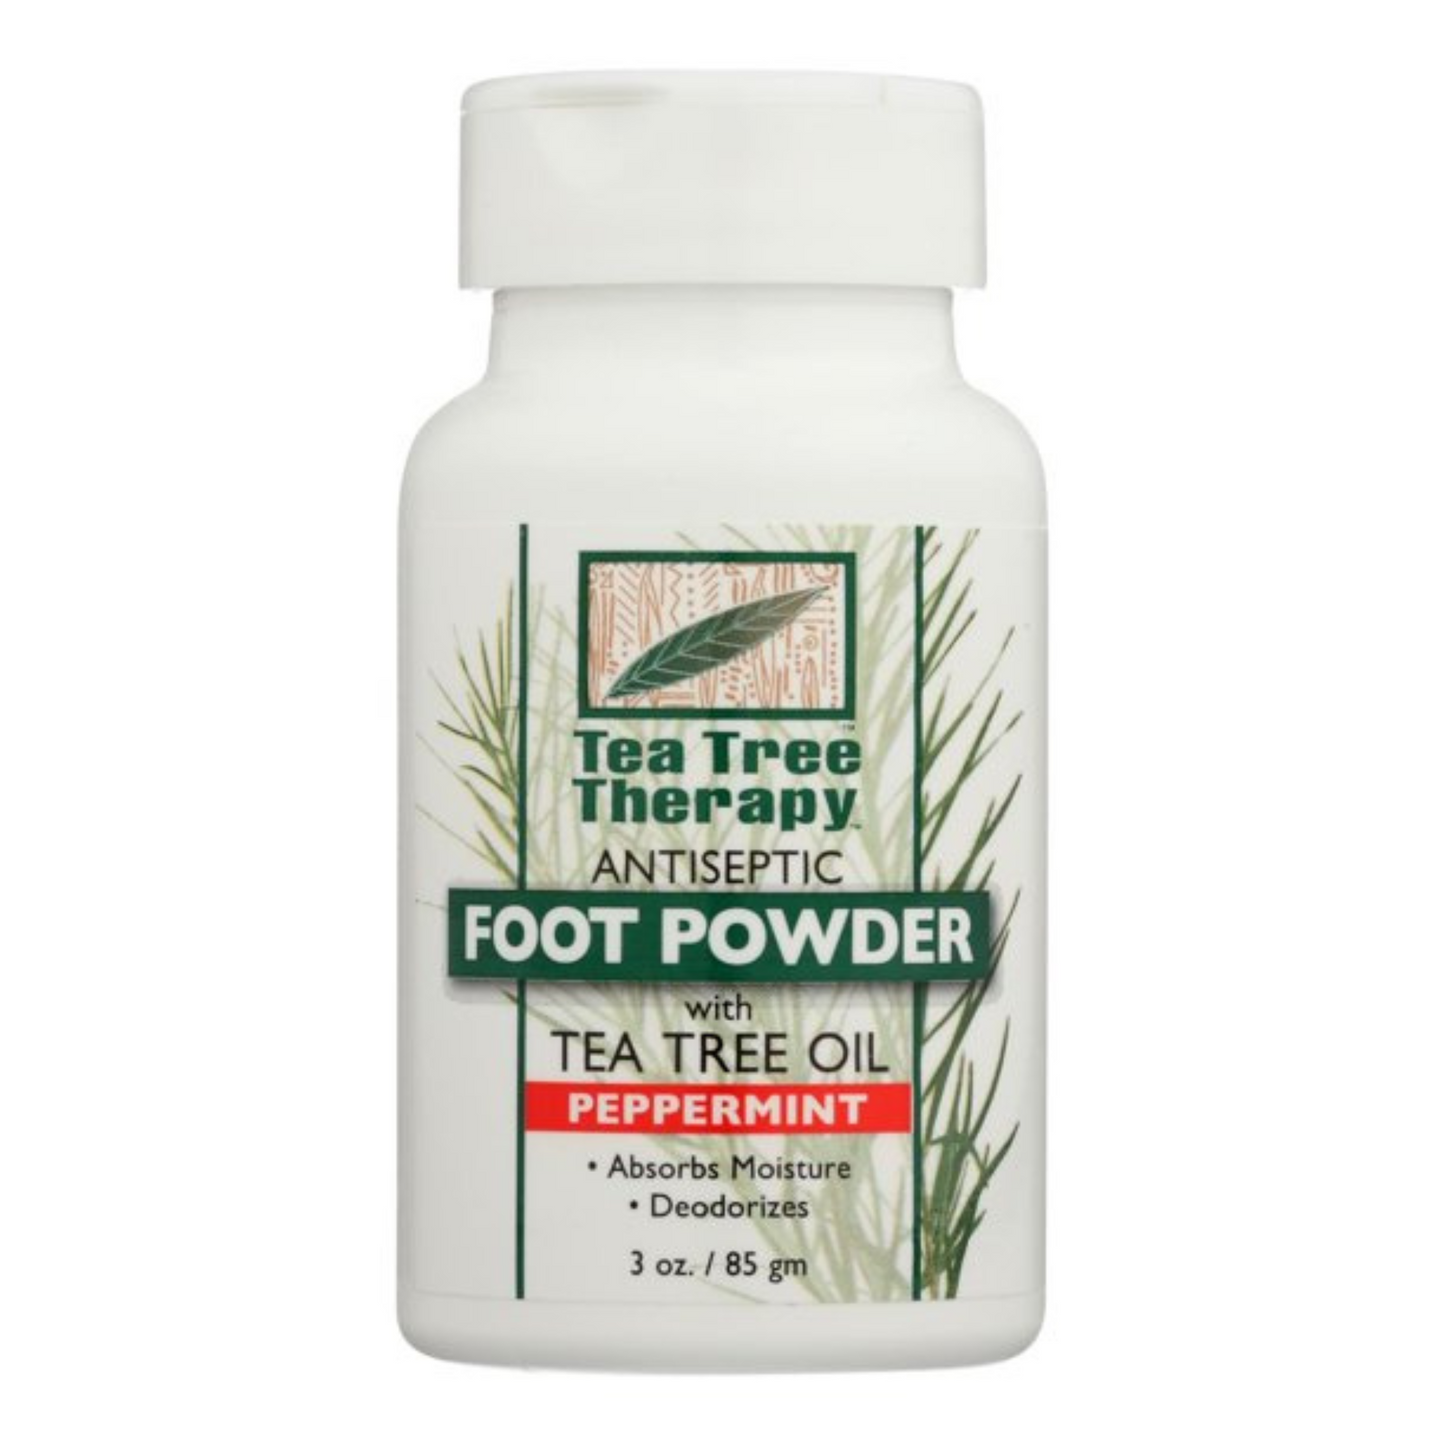 Primary Image of Tea Tree Therapy Peppermint Antiseptic Foot Powder (3 oz)